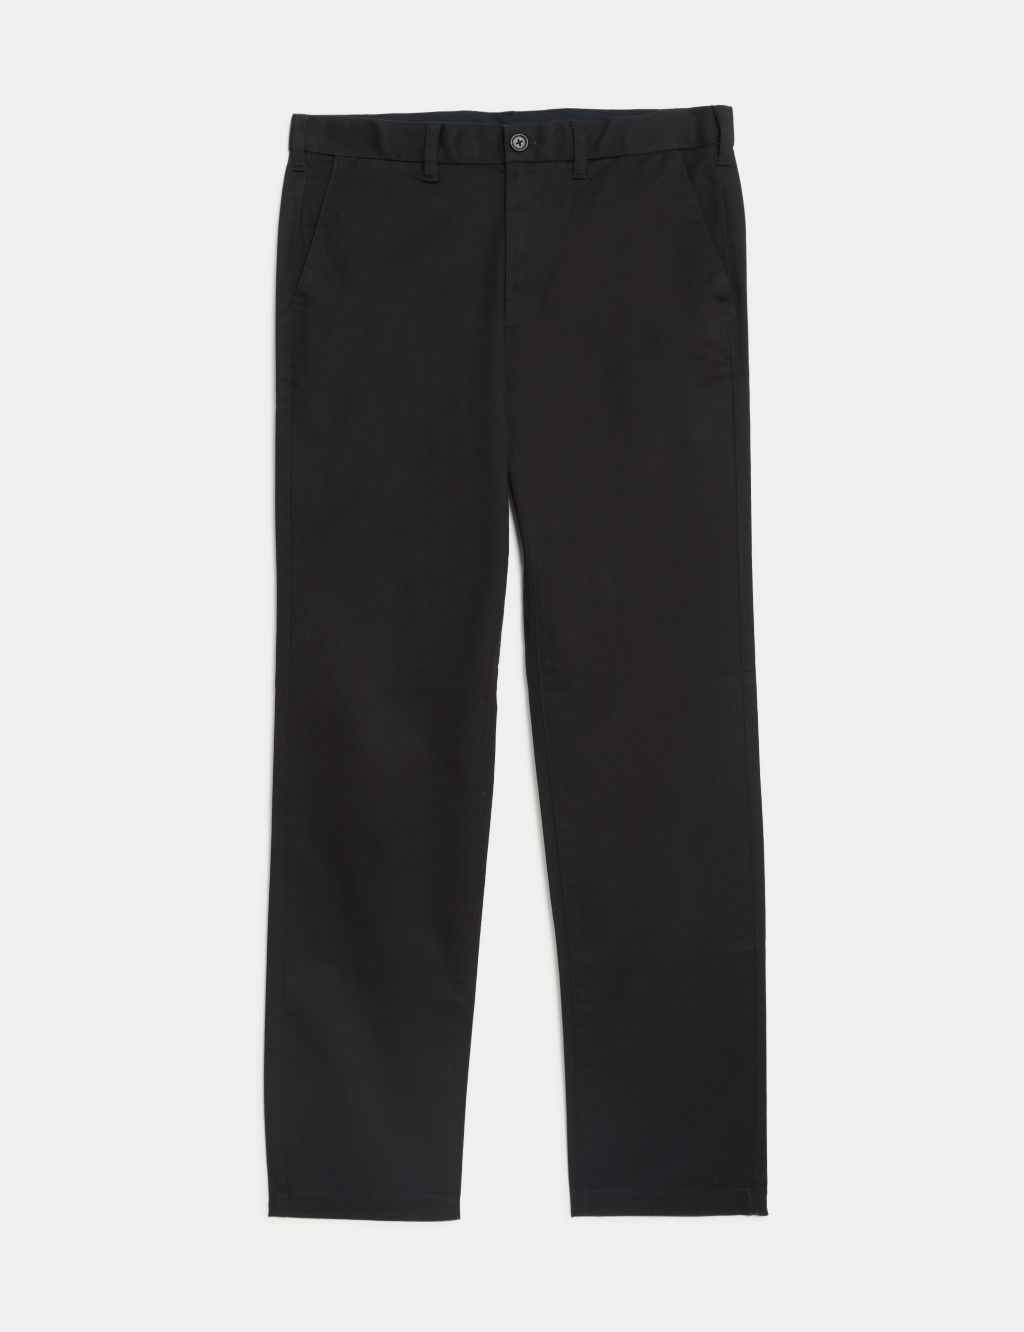 Page 2 - Men’s Chinos | M&S